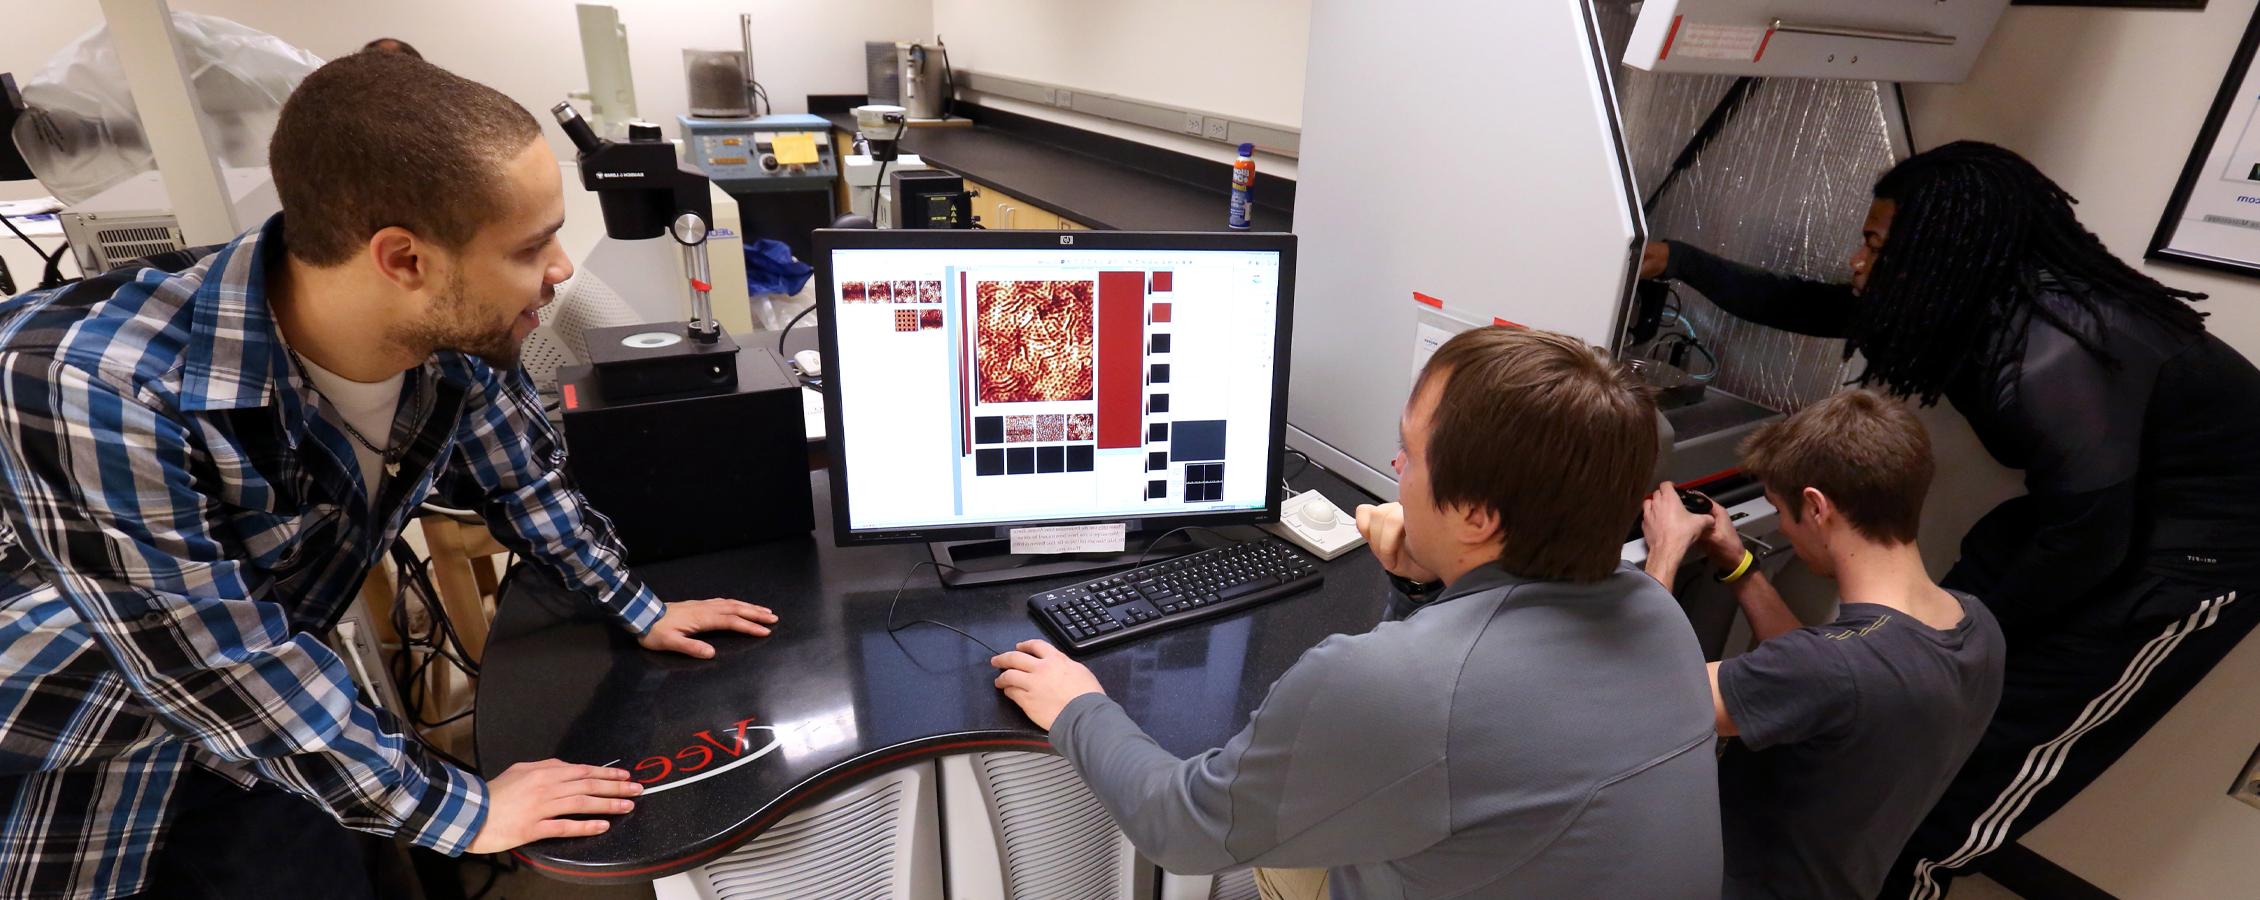 Students look at magnifications on a computer in the physics lab.